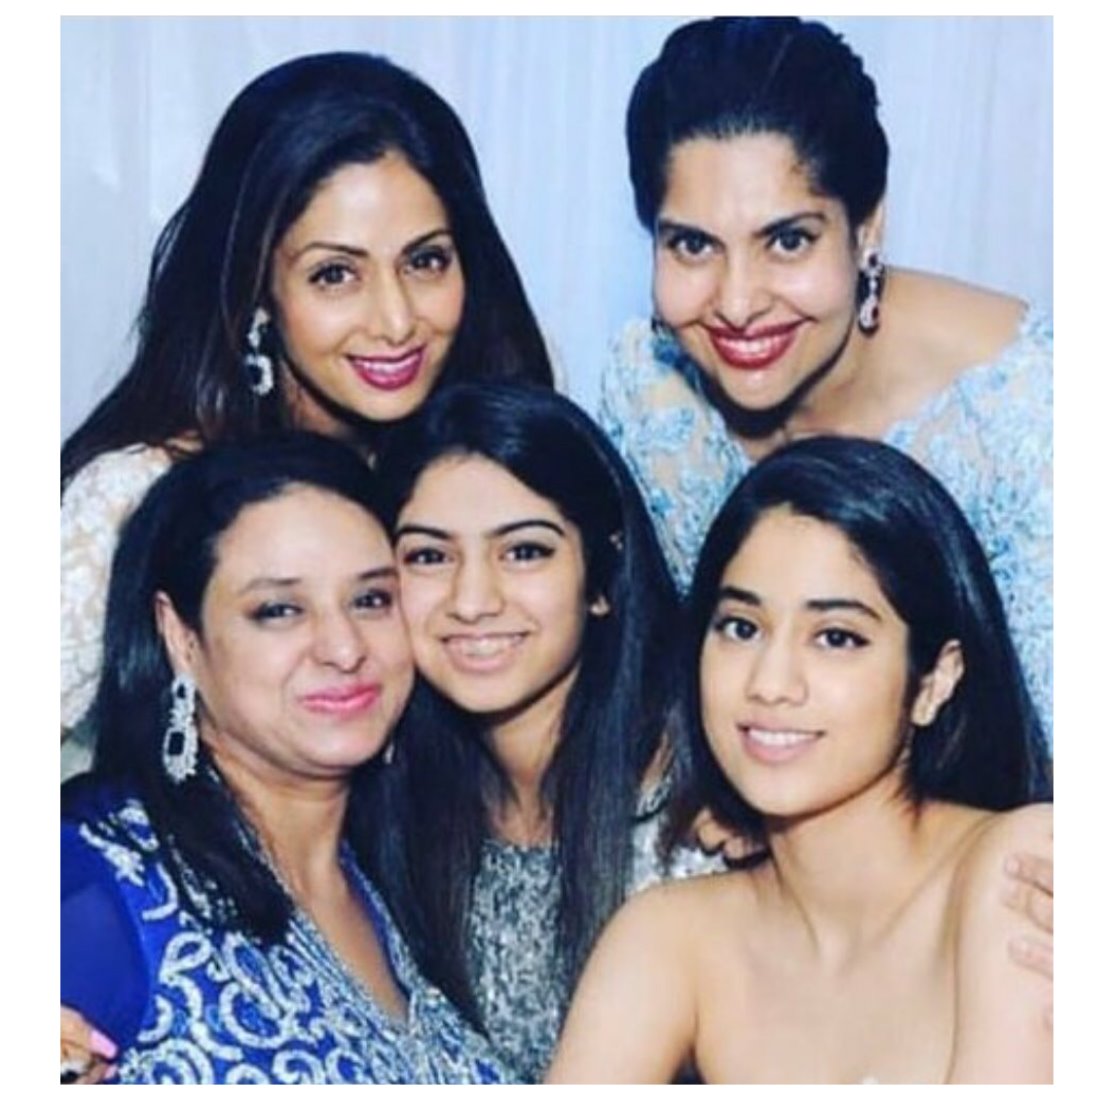 Sridevi on Twitter: "#Sridevi's family; the Ayappan girls The hyphenate  hasn't really been adopted in India, otherwise, it could have been Janhvi  Ayappan-Kapoor and Khushi Ayappan-Kapoor or something. Embracing their  maternal side.